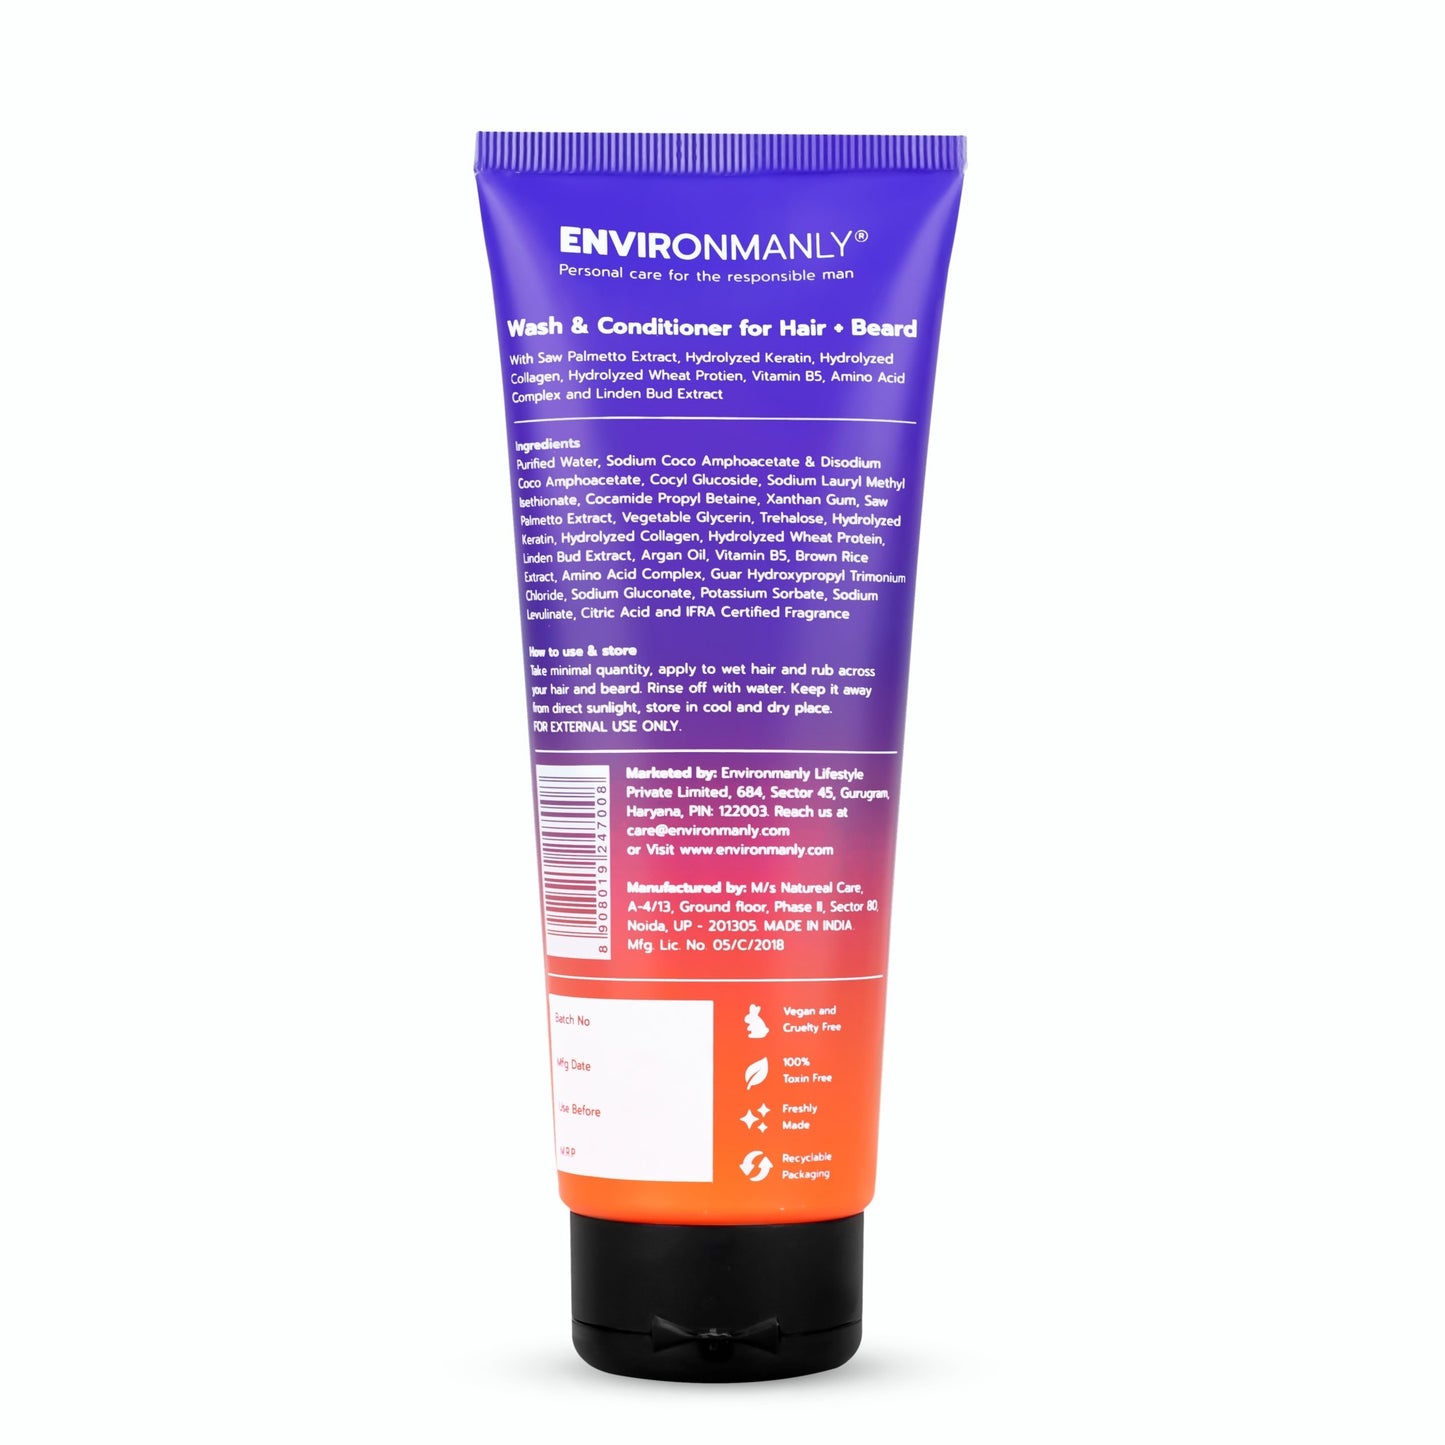 Hair & Beard Wash + Conditioner - Environmanly